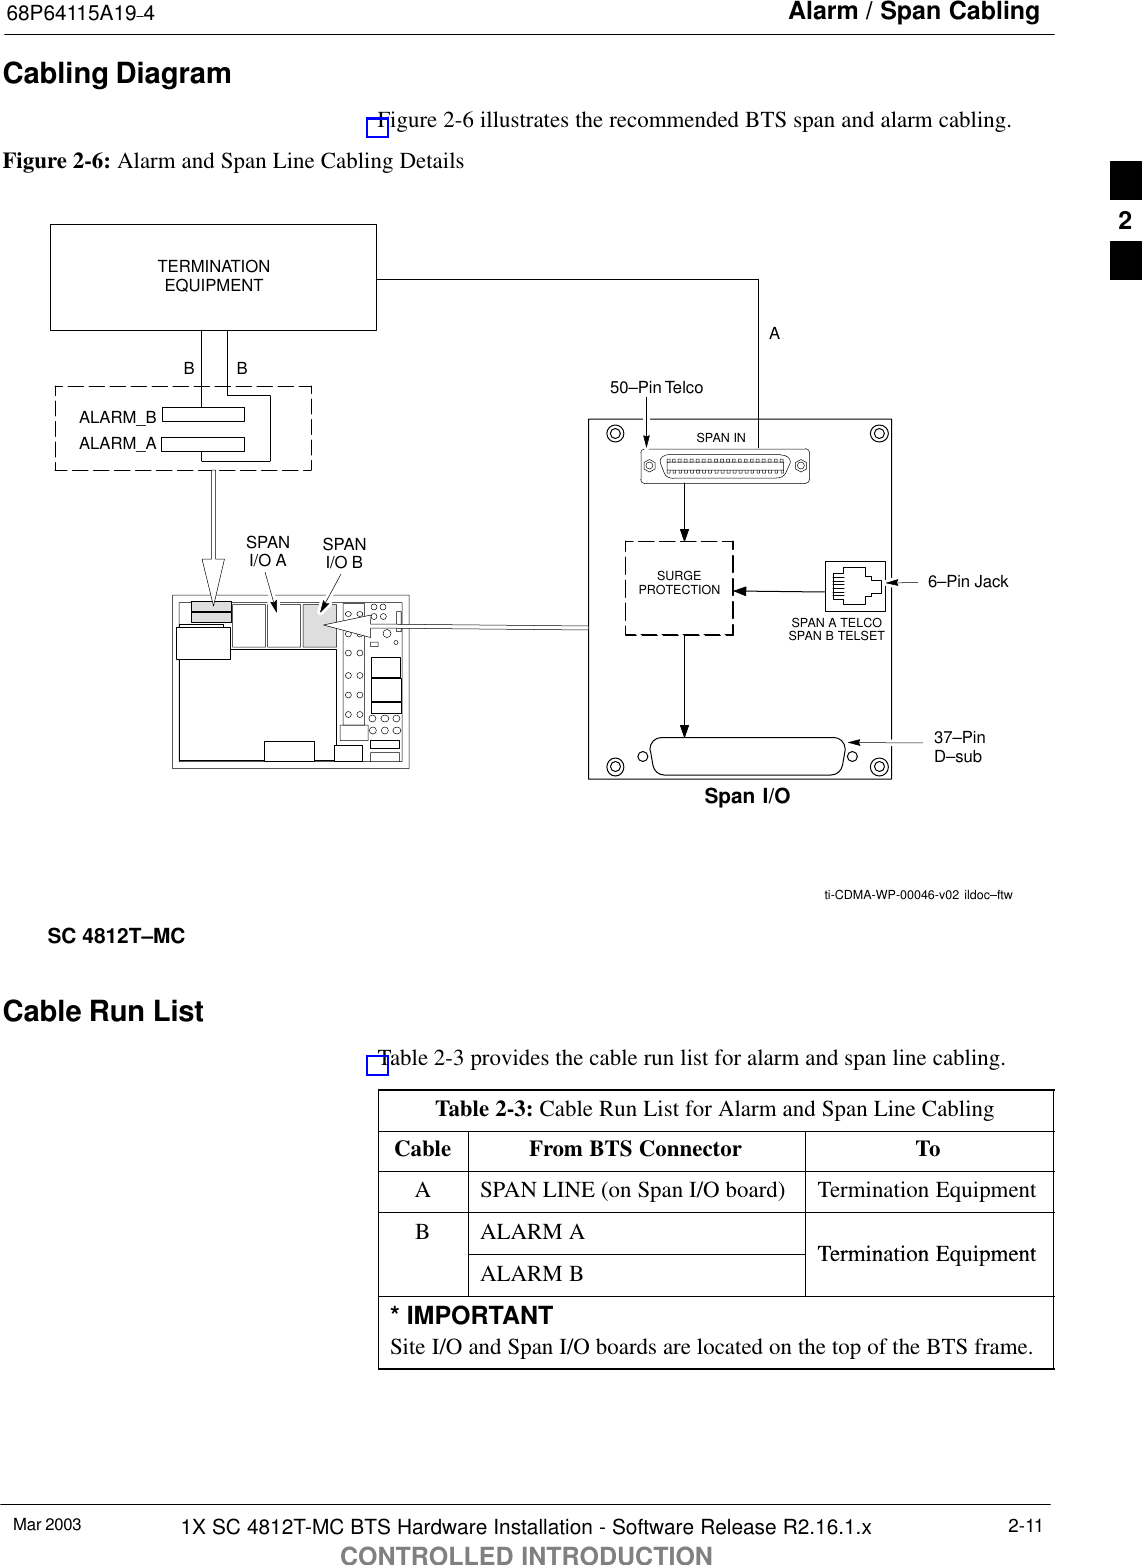 Alarm / Span Cabling68P64115A19–4Mar 2003 1X SC 4812T-MC BTS Hardware Installation - Software Release R2.16.1.xCONTROLLED INTRODUCTION2-11Cabling DiagramFigure 2-6 illustrates the recommended BTS span and alarm cabling.Figure 2-6: Alarm and Span Line Cabling DetailsTERMINATIONEQUIPMENTBBASC 4812T–MCALARM_BALARM_ASPANI/O A SPANI/O BSpan I/OSURGEPROTECTIONSPAN A TELCOSPAN B TELSETSPAN IN50–Pin Telco37–PinD–sub6–Pin Jackti-CDMA-WP-00046-v02 ildoc–ftwCable Run ListTable 2-3 provides the cable run list for alarm and span line cabling.Table 2-3: Cable Run List for Alarm and Span Line CablingCable From BTS Connector ToASPAN LINE (on Span I/O board) Termination EquipmentBALARM ATermination EquipmentALARM BTermination Equipment* IMPORTANTSite I/O and Span I/O boards are located on the top of the BTS frame.2